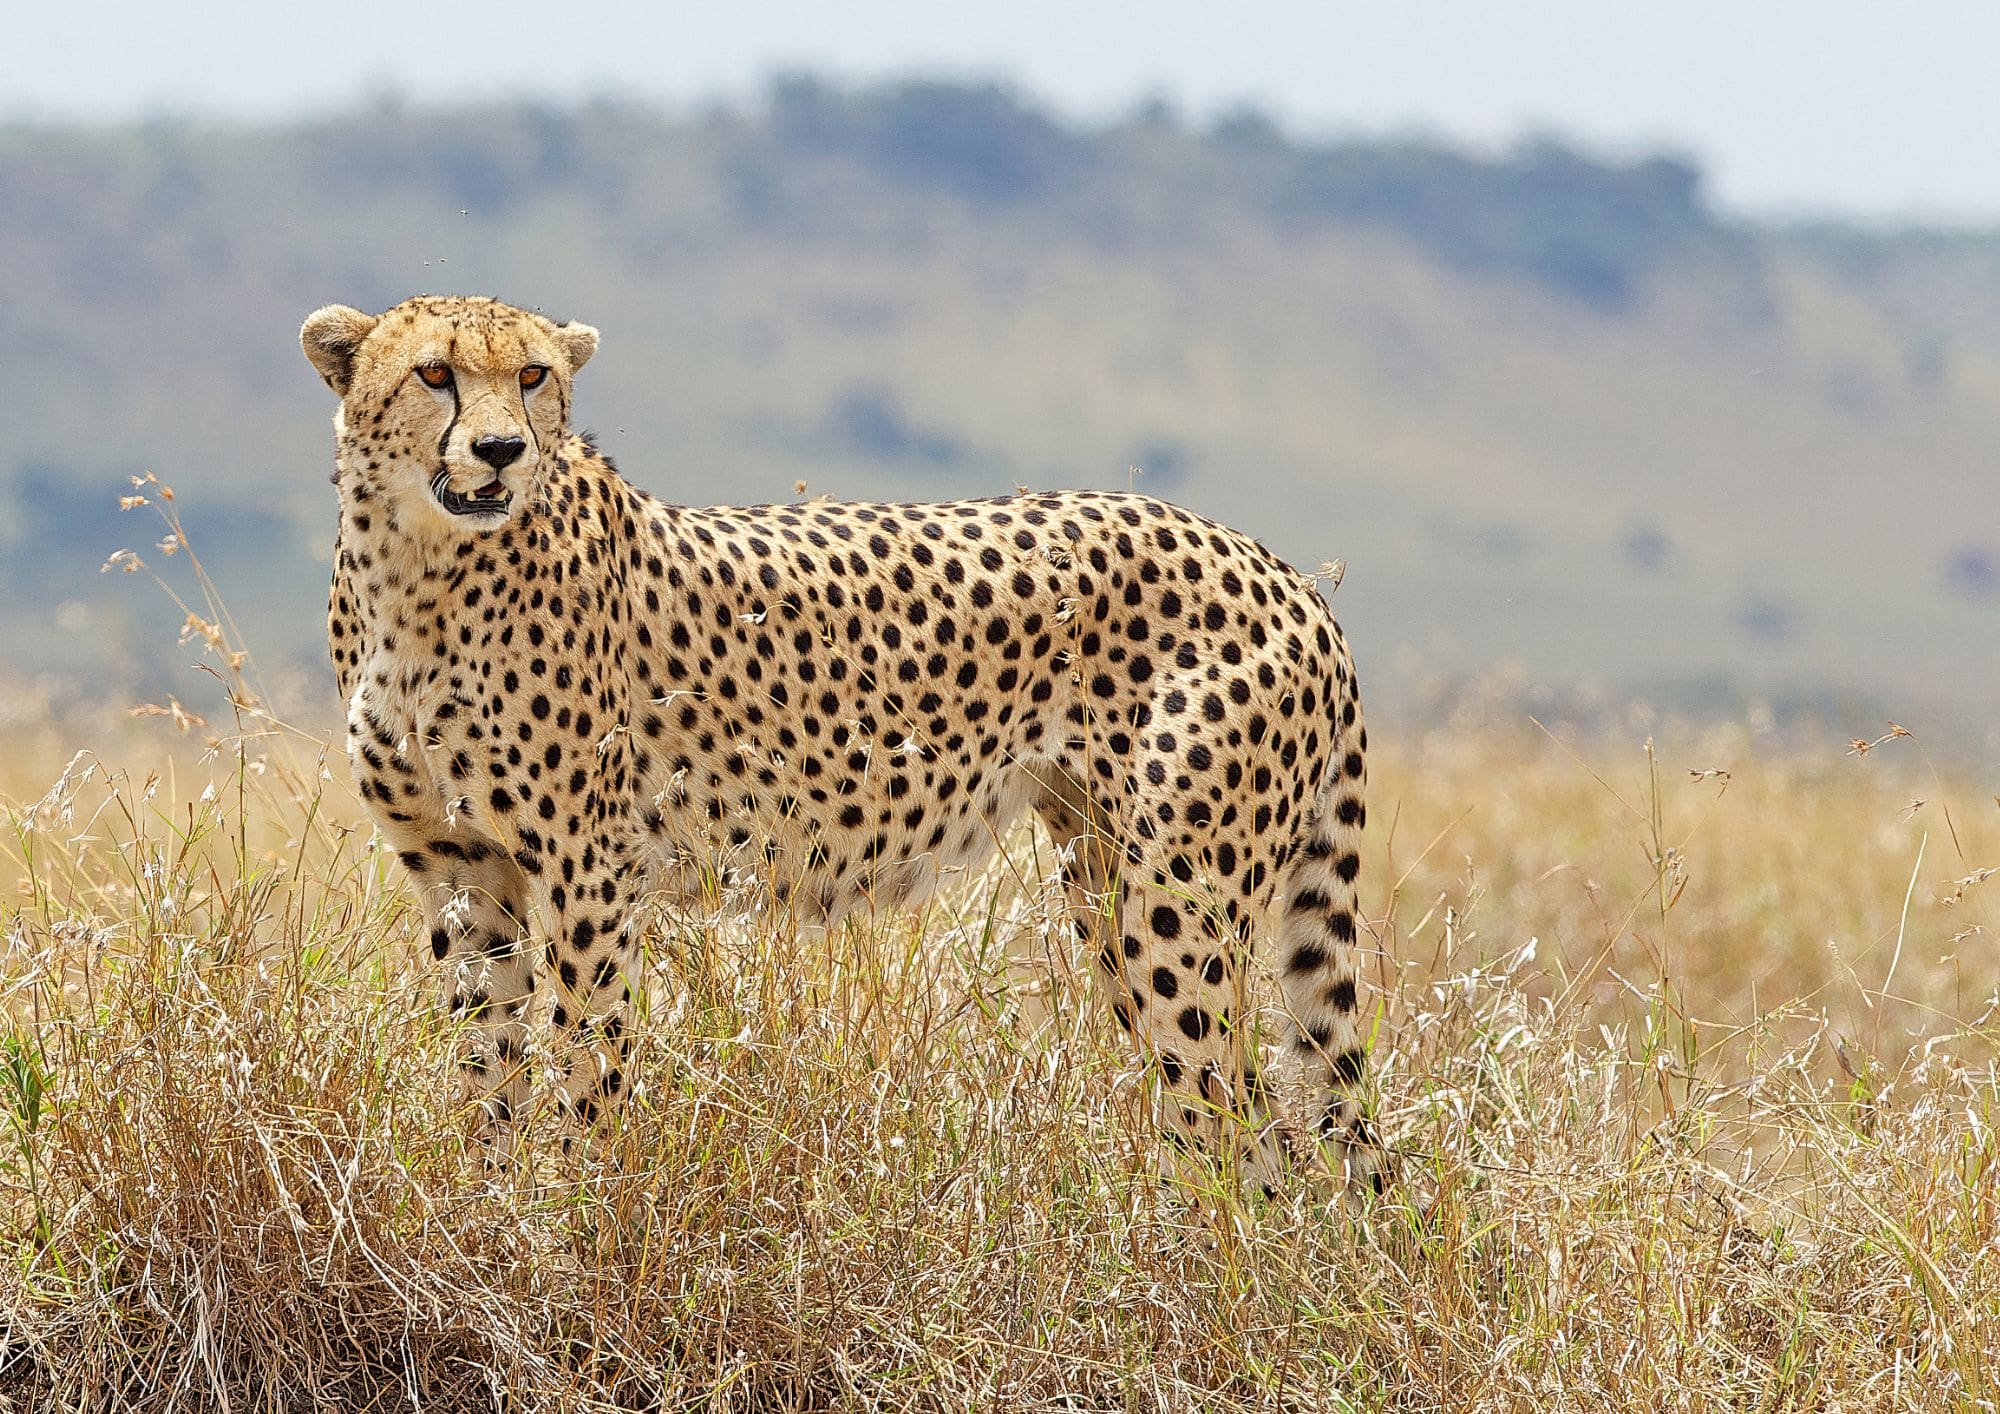 A fabulous photo of a cheetah standing in brown grasses, looking at something in the distance.